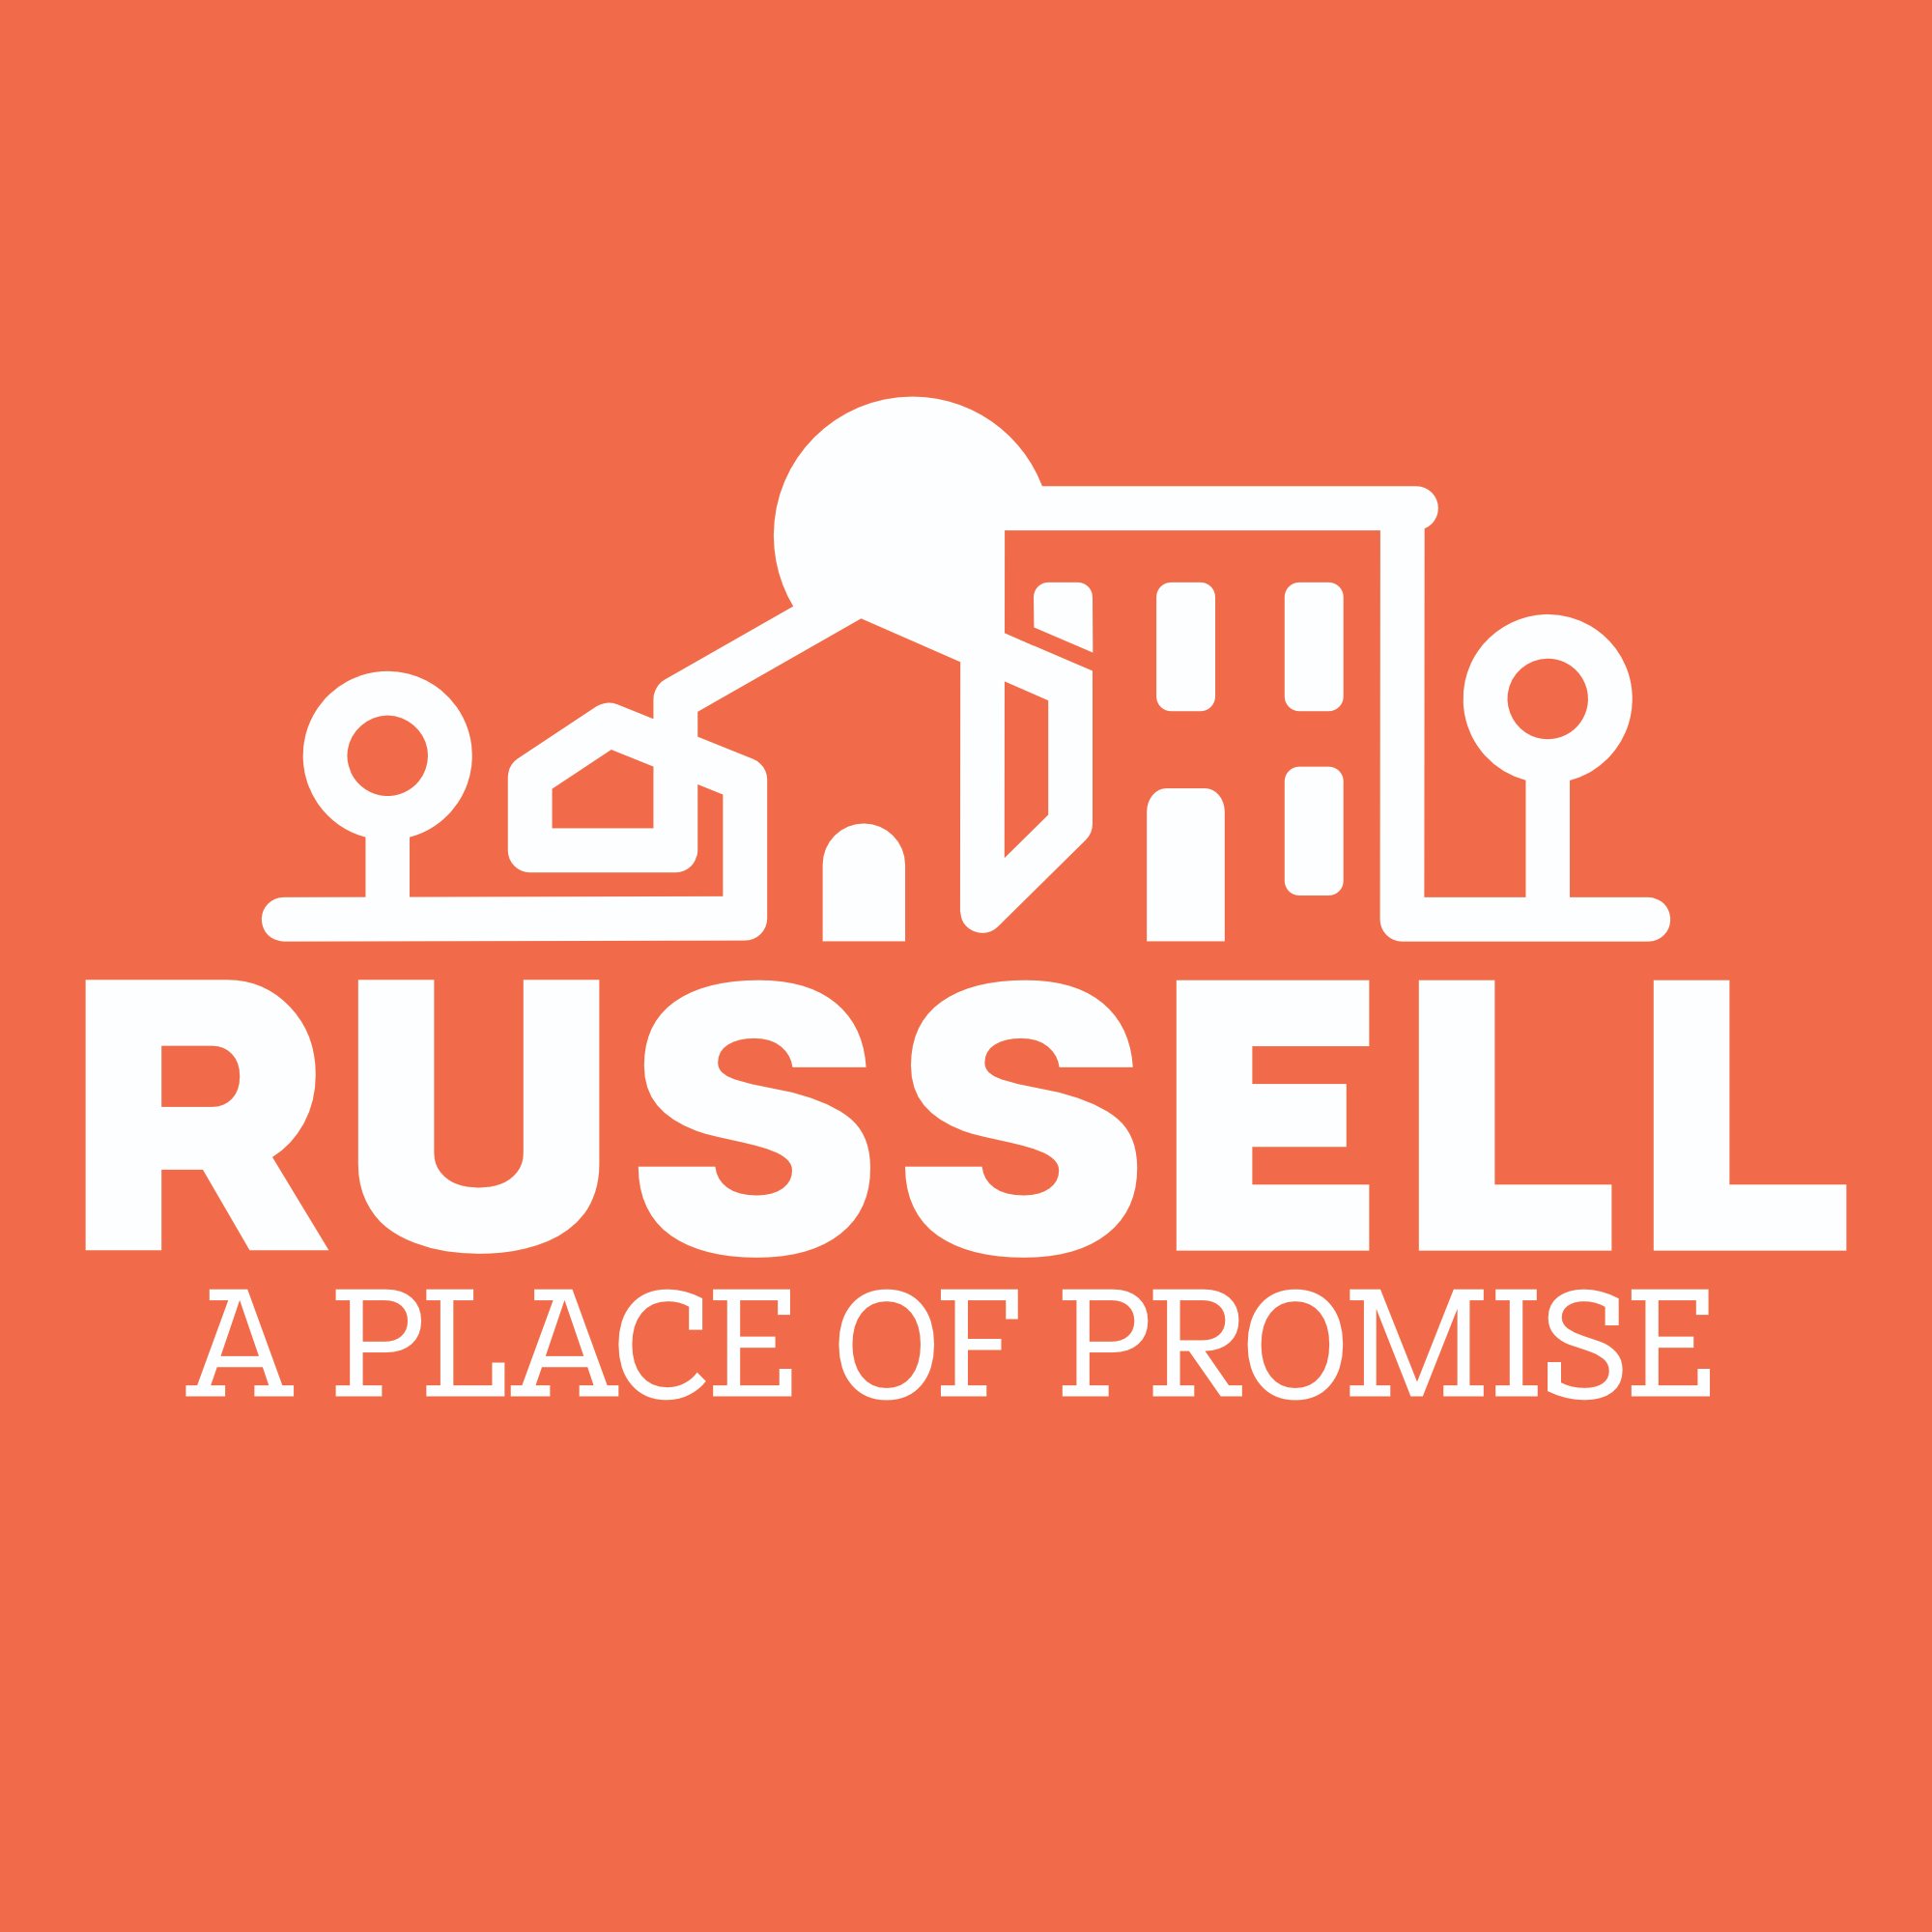 RPOP is a justice-based initiative focused on building Black wealth by generating investments without displacement in the Russell neighborhood of Louisville, KY